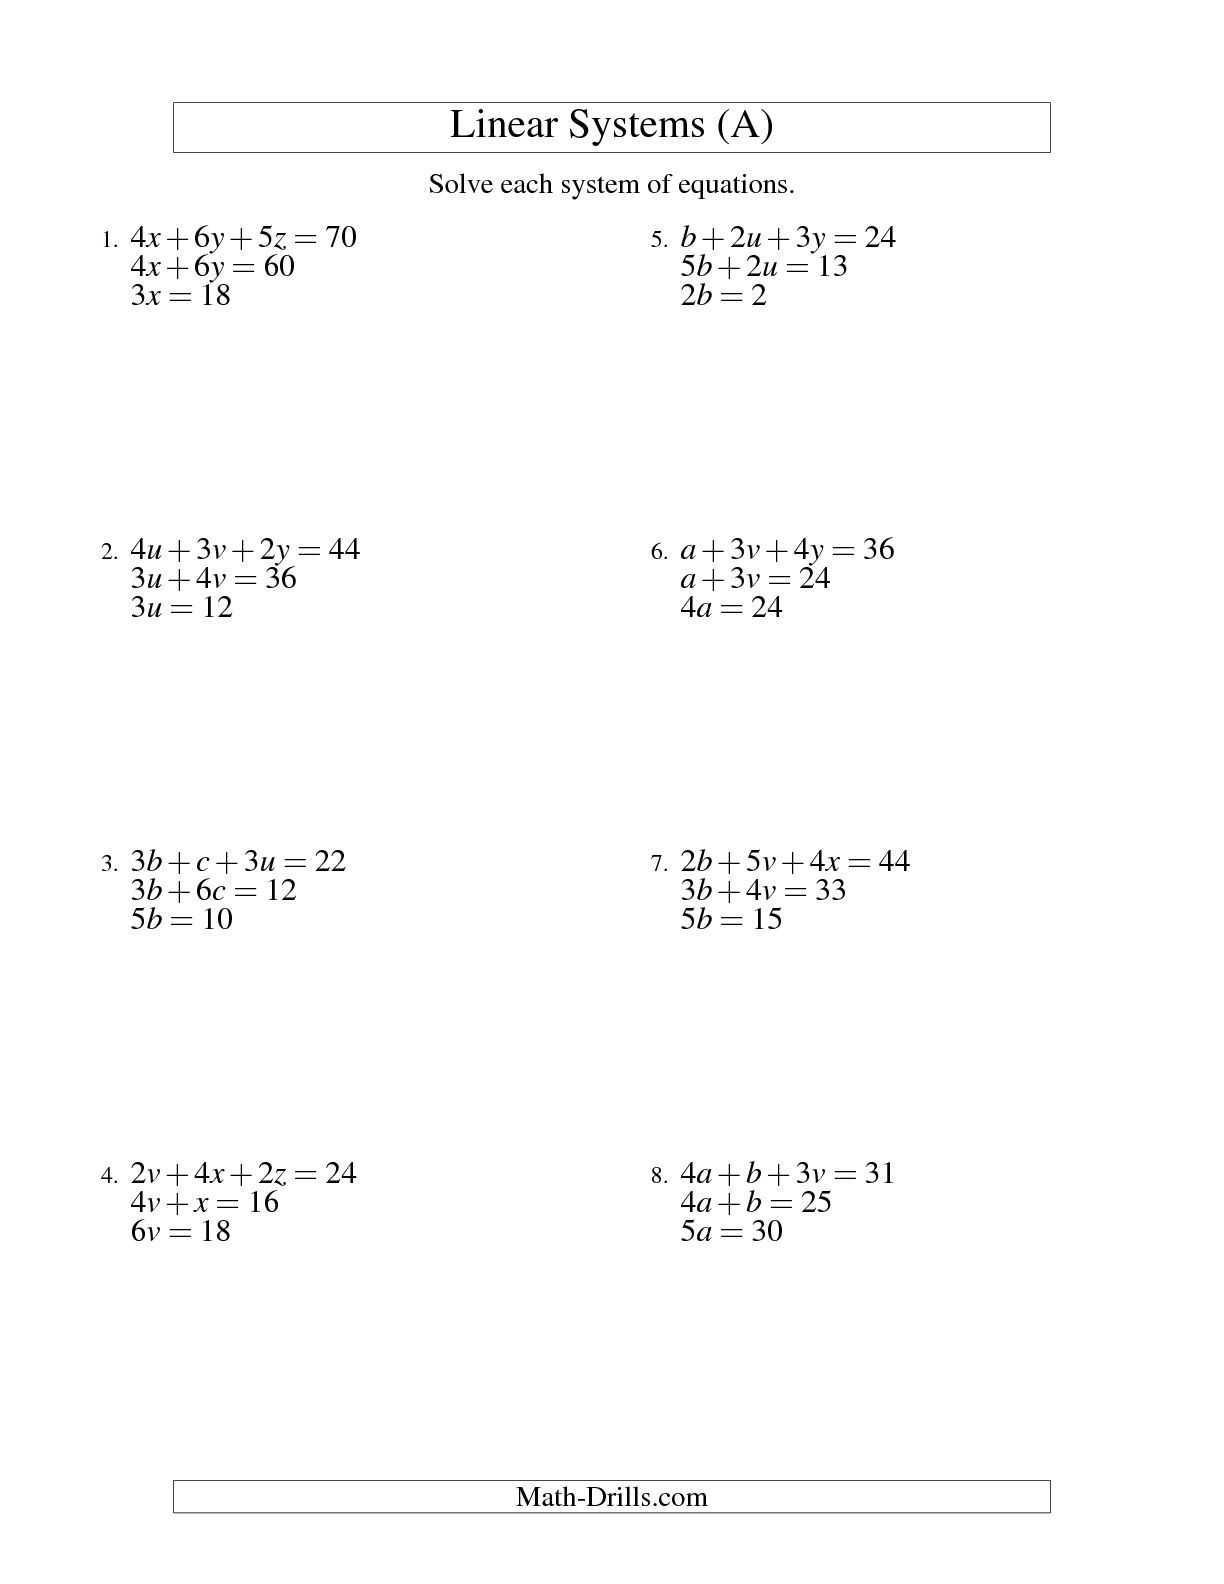 Solving Exponential Equations Worksheet together with solving Systems Linear Equations and Inequalities Worksheets